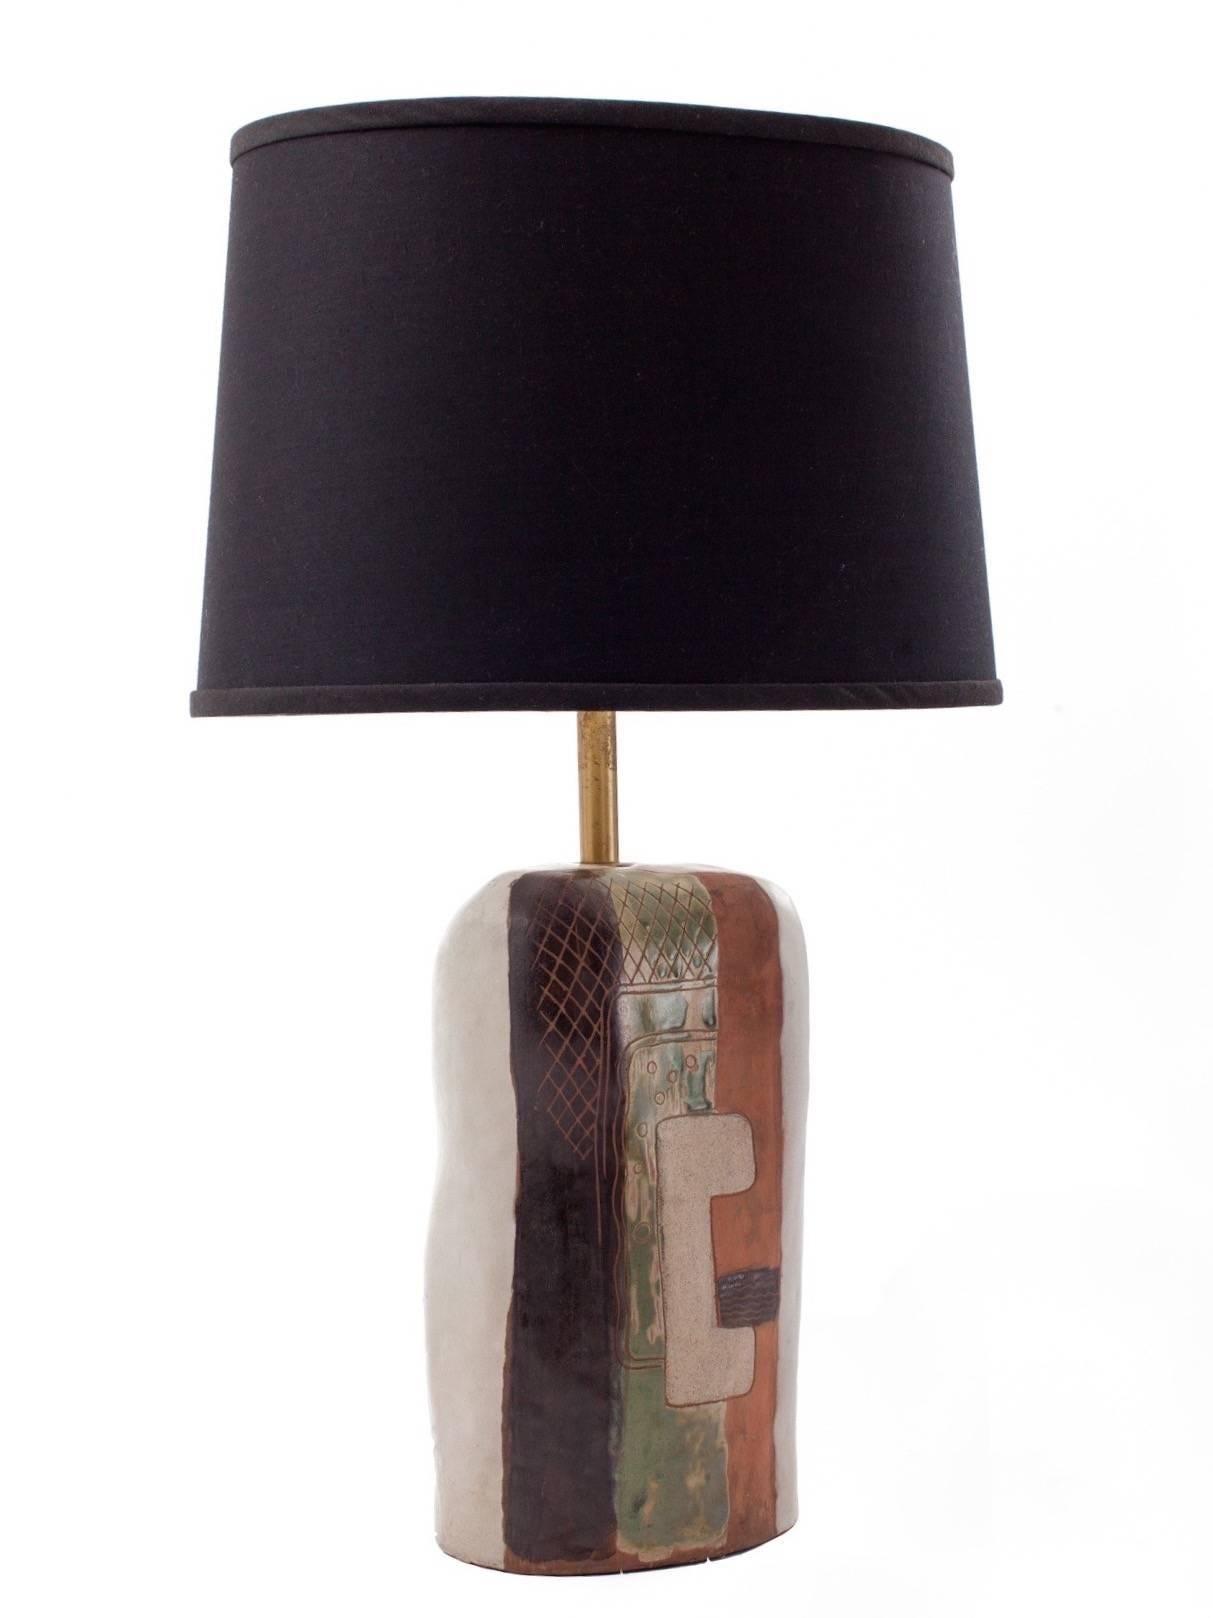 Marianna von Allesch (1886-1972)

Biomorphic ceramic table lamp by German-born ceramicist and glassmaker Marianna von Allesch, sgraffito etched with an abstract, Cubist design. With brass mounts and thick bands of green, pink, black, and white